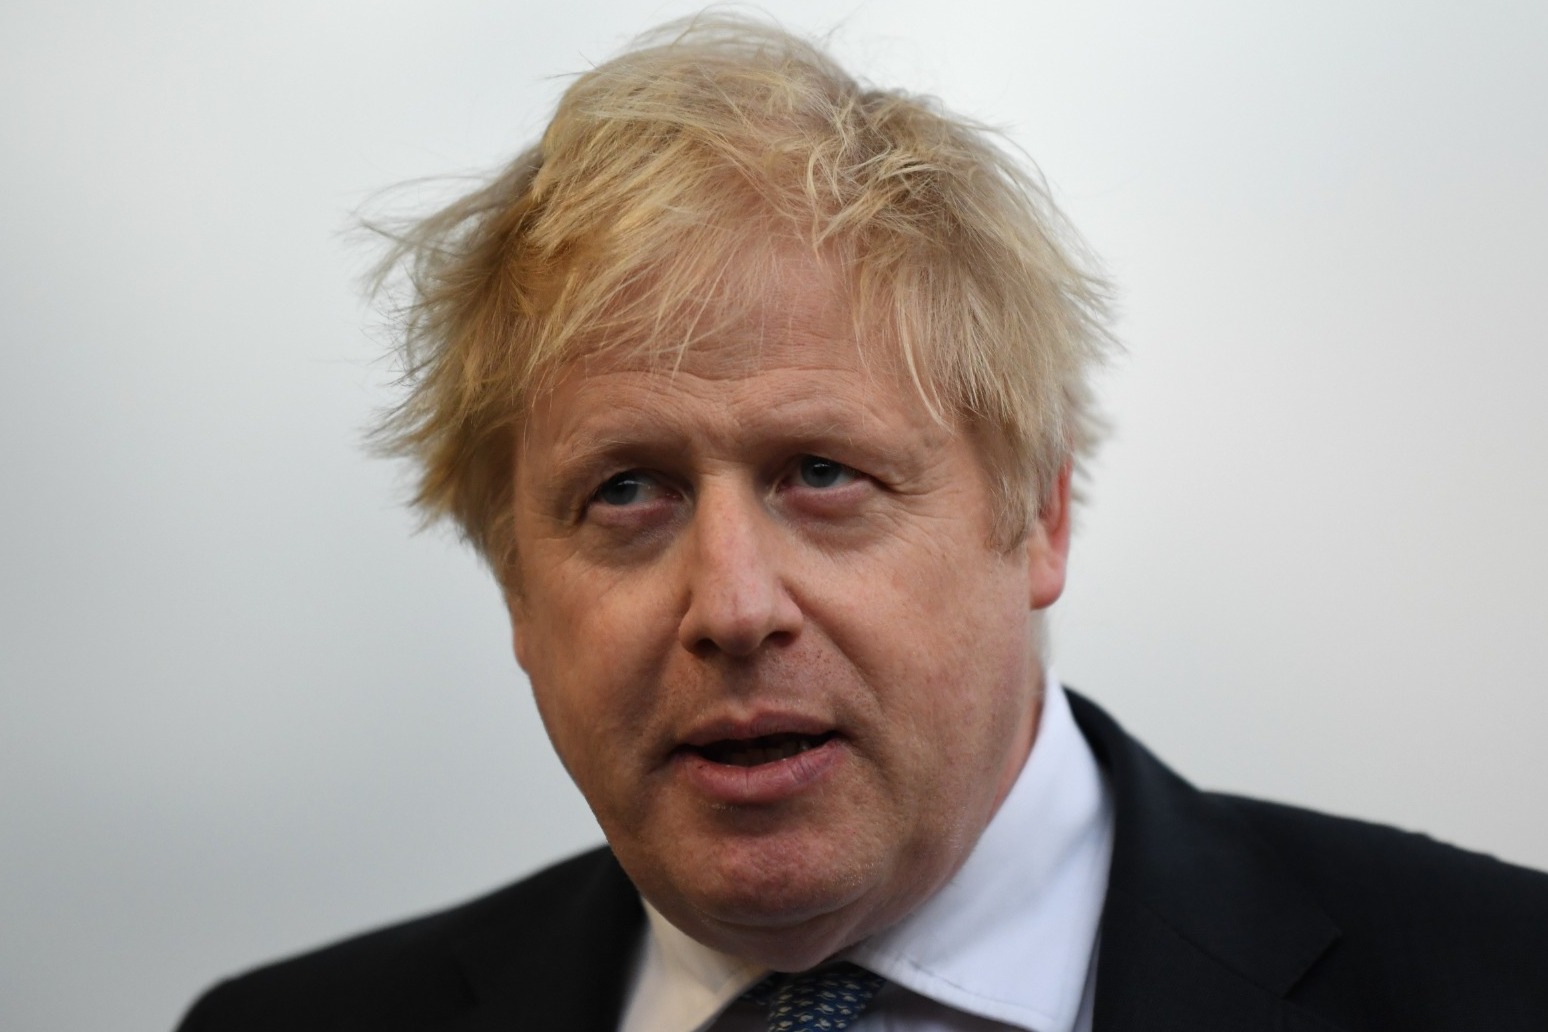 Boris Johnson receives legal questionnaire from partygate police